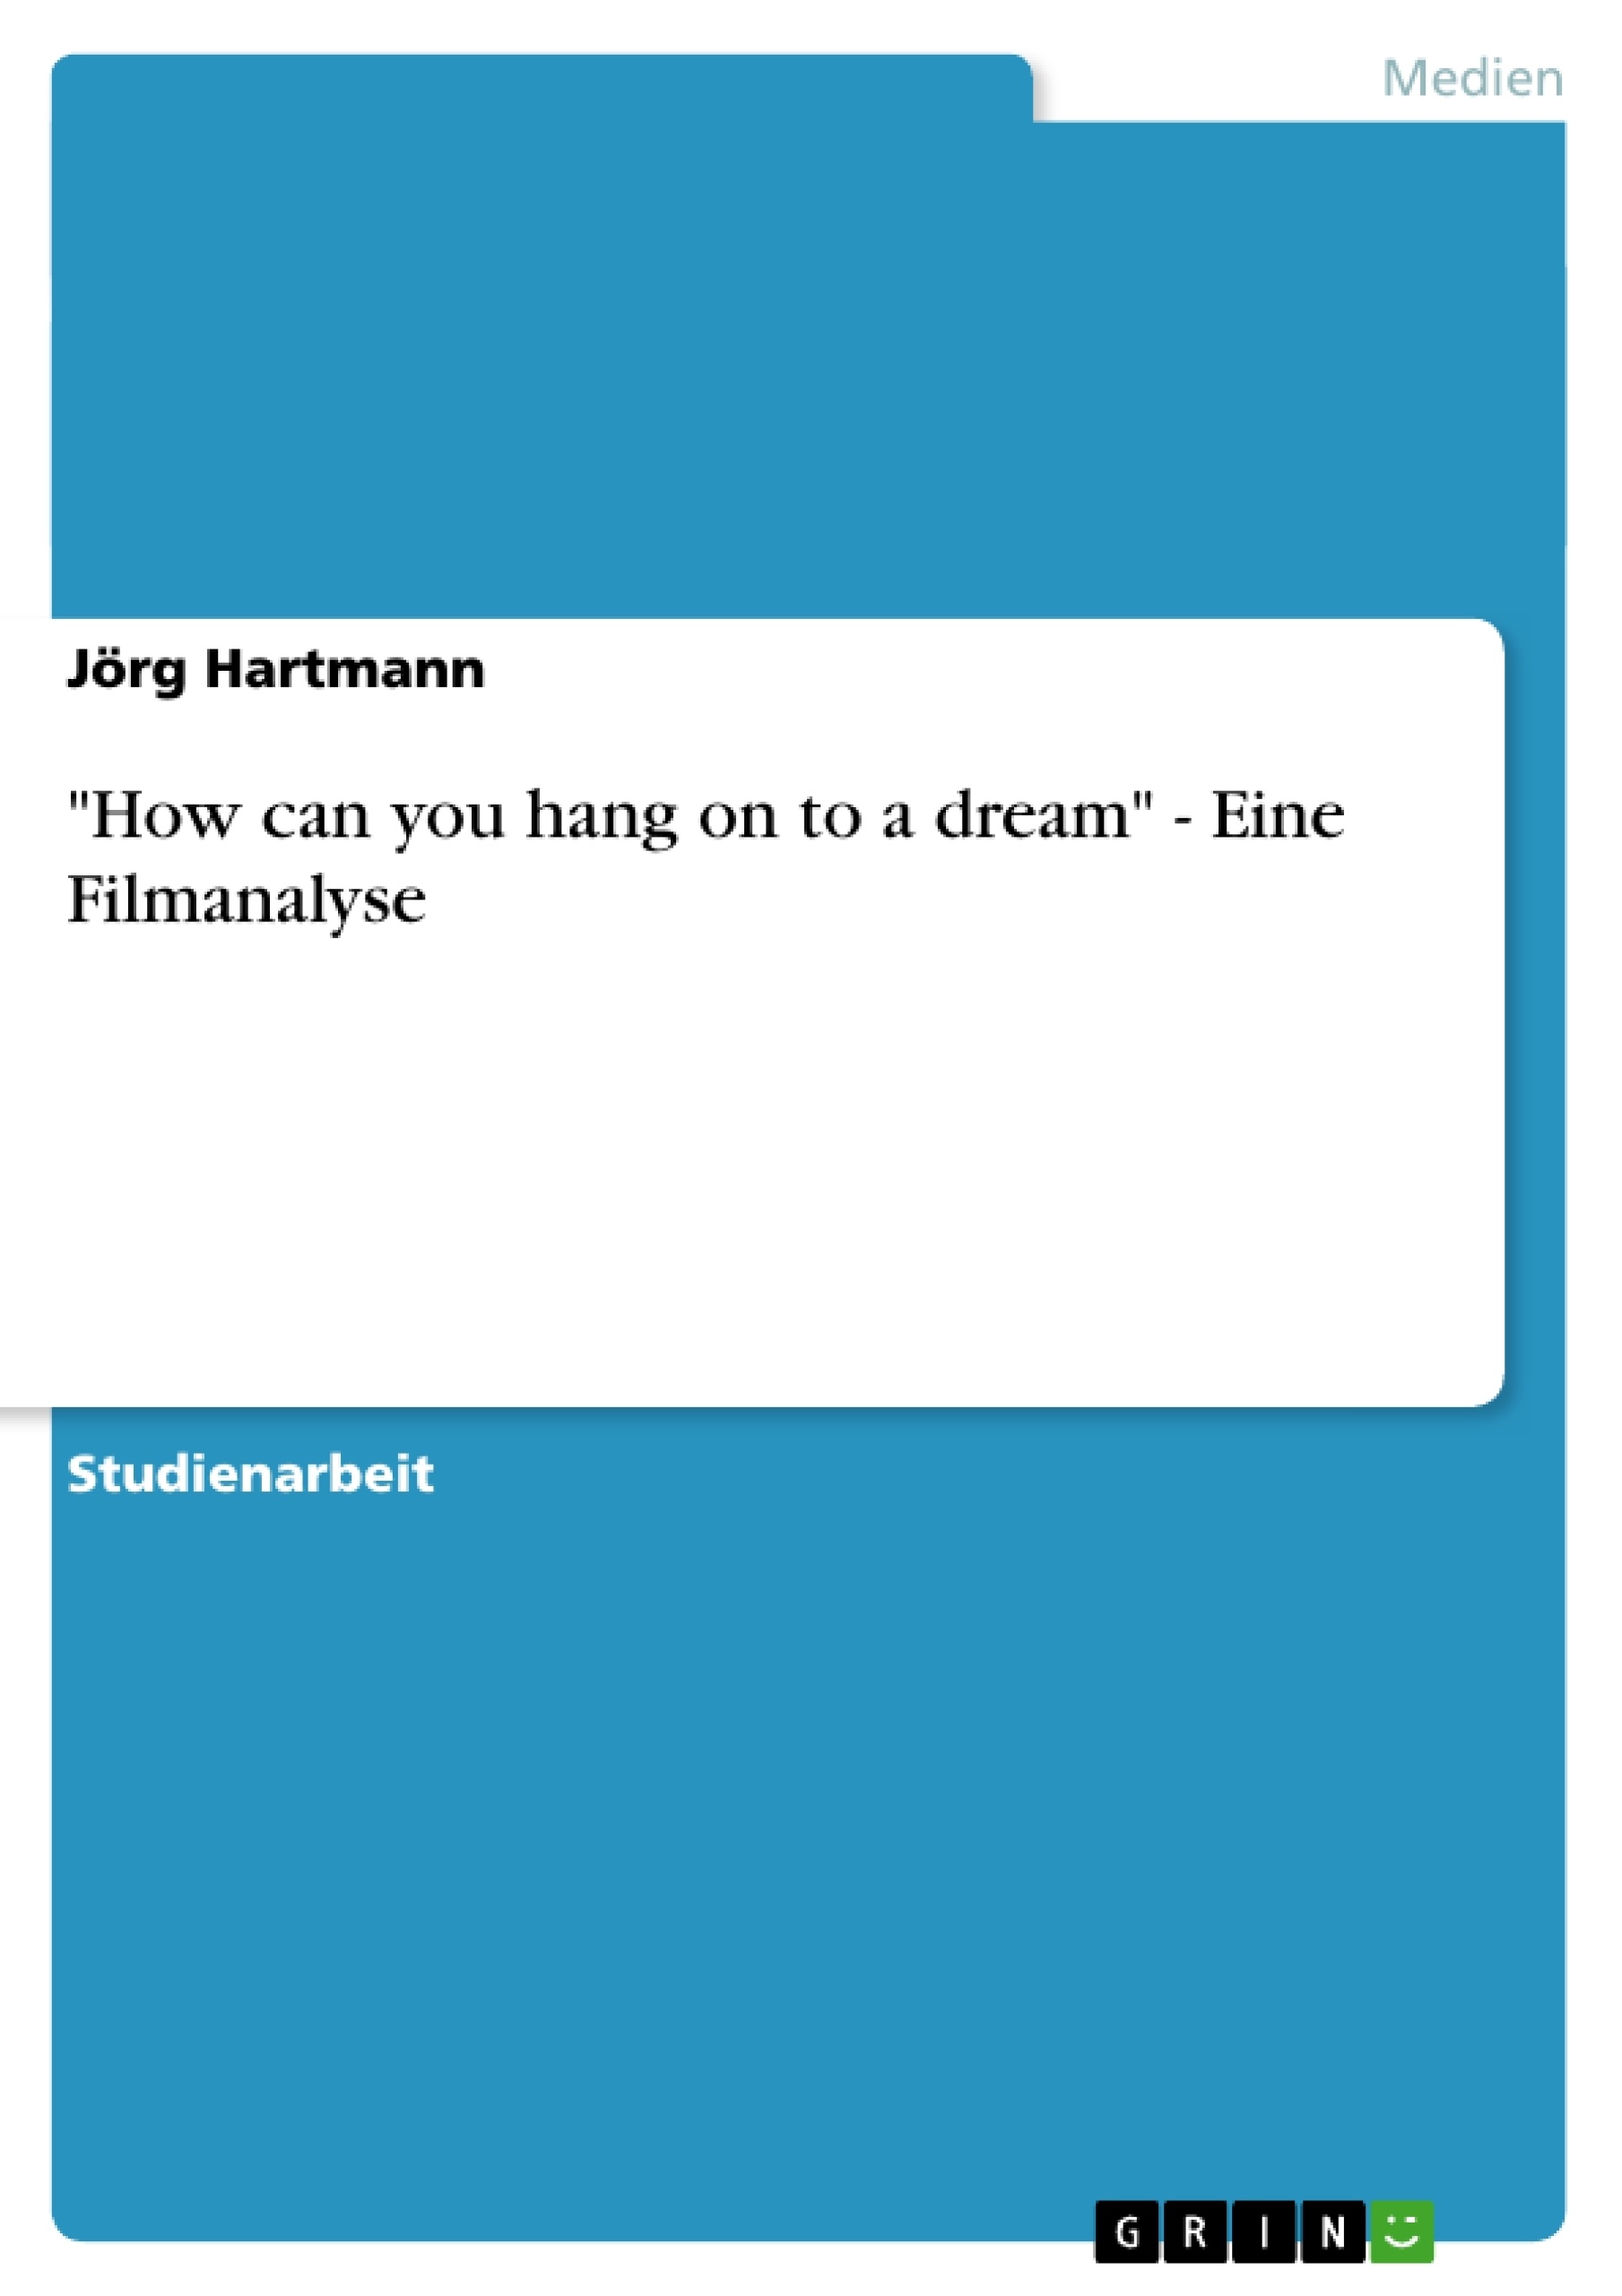 Título: "How can you hang on to a dream" - Eine Filmanalyse